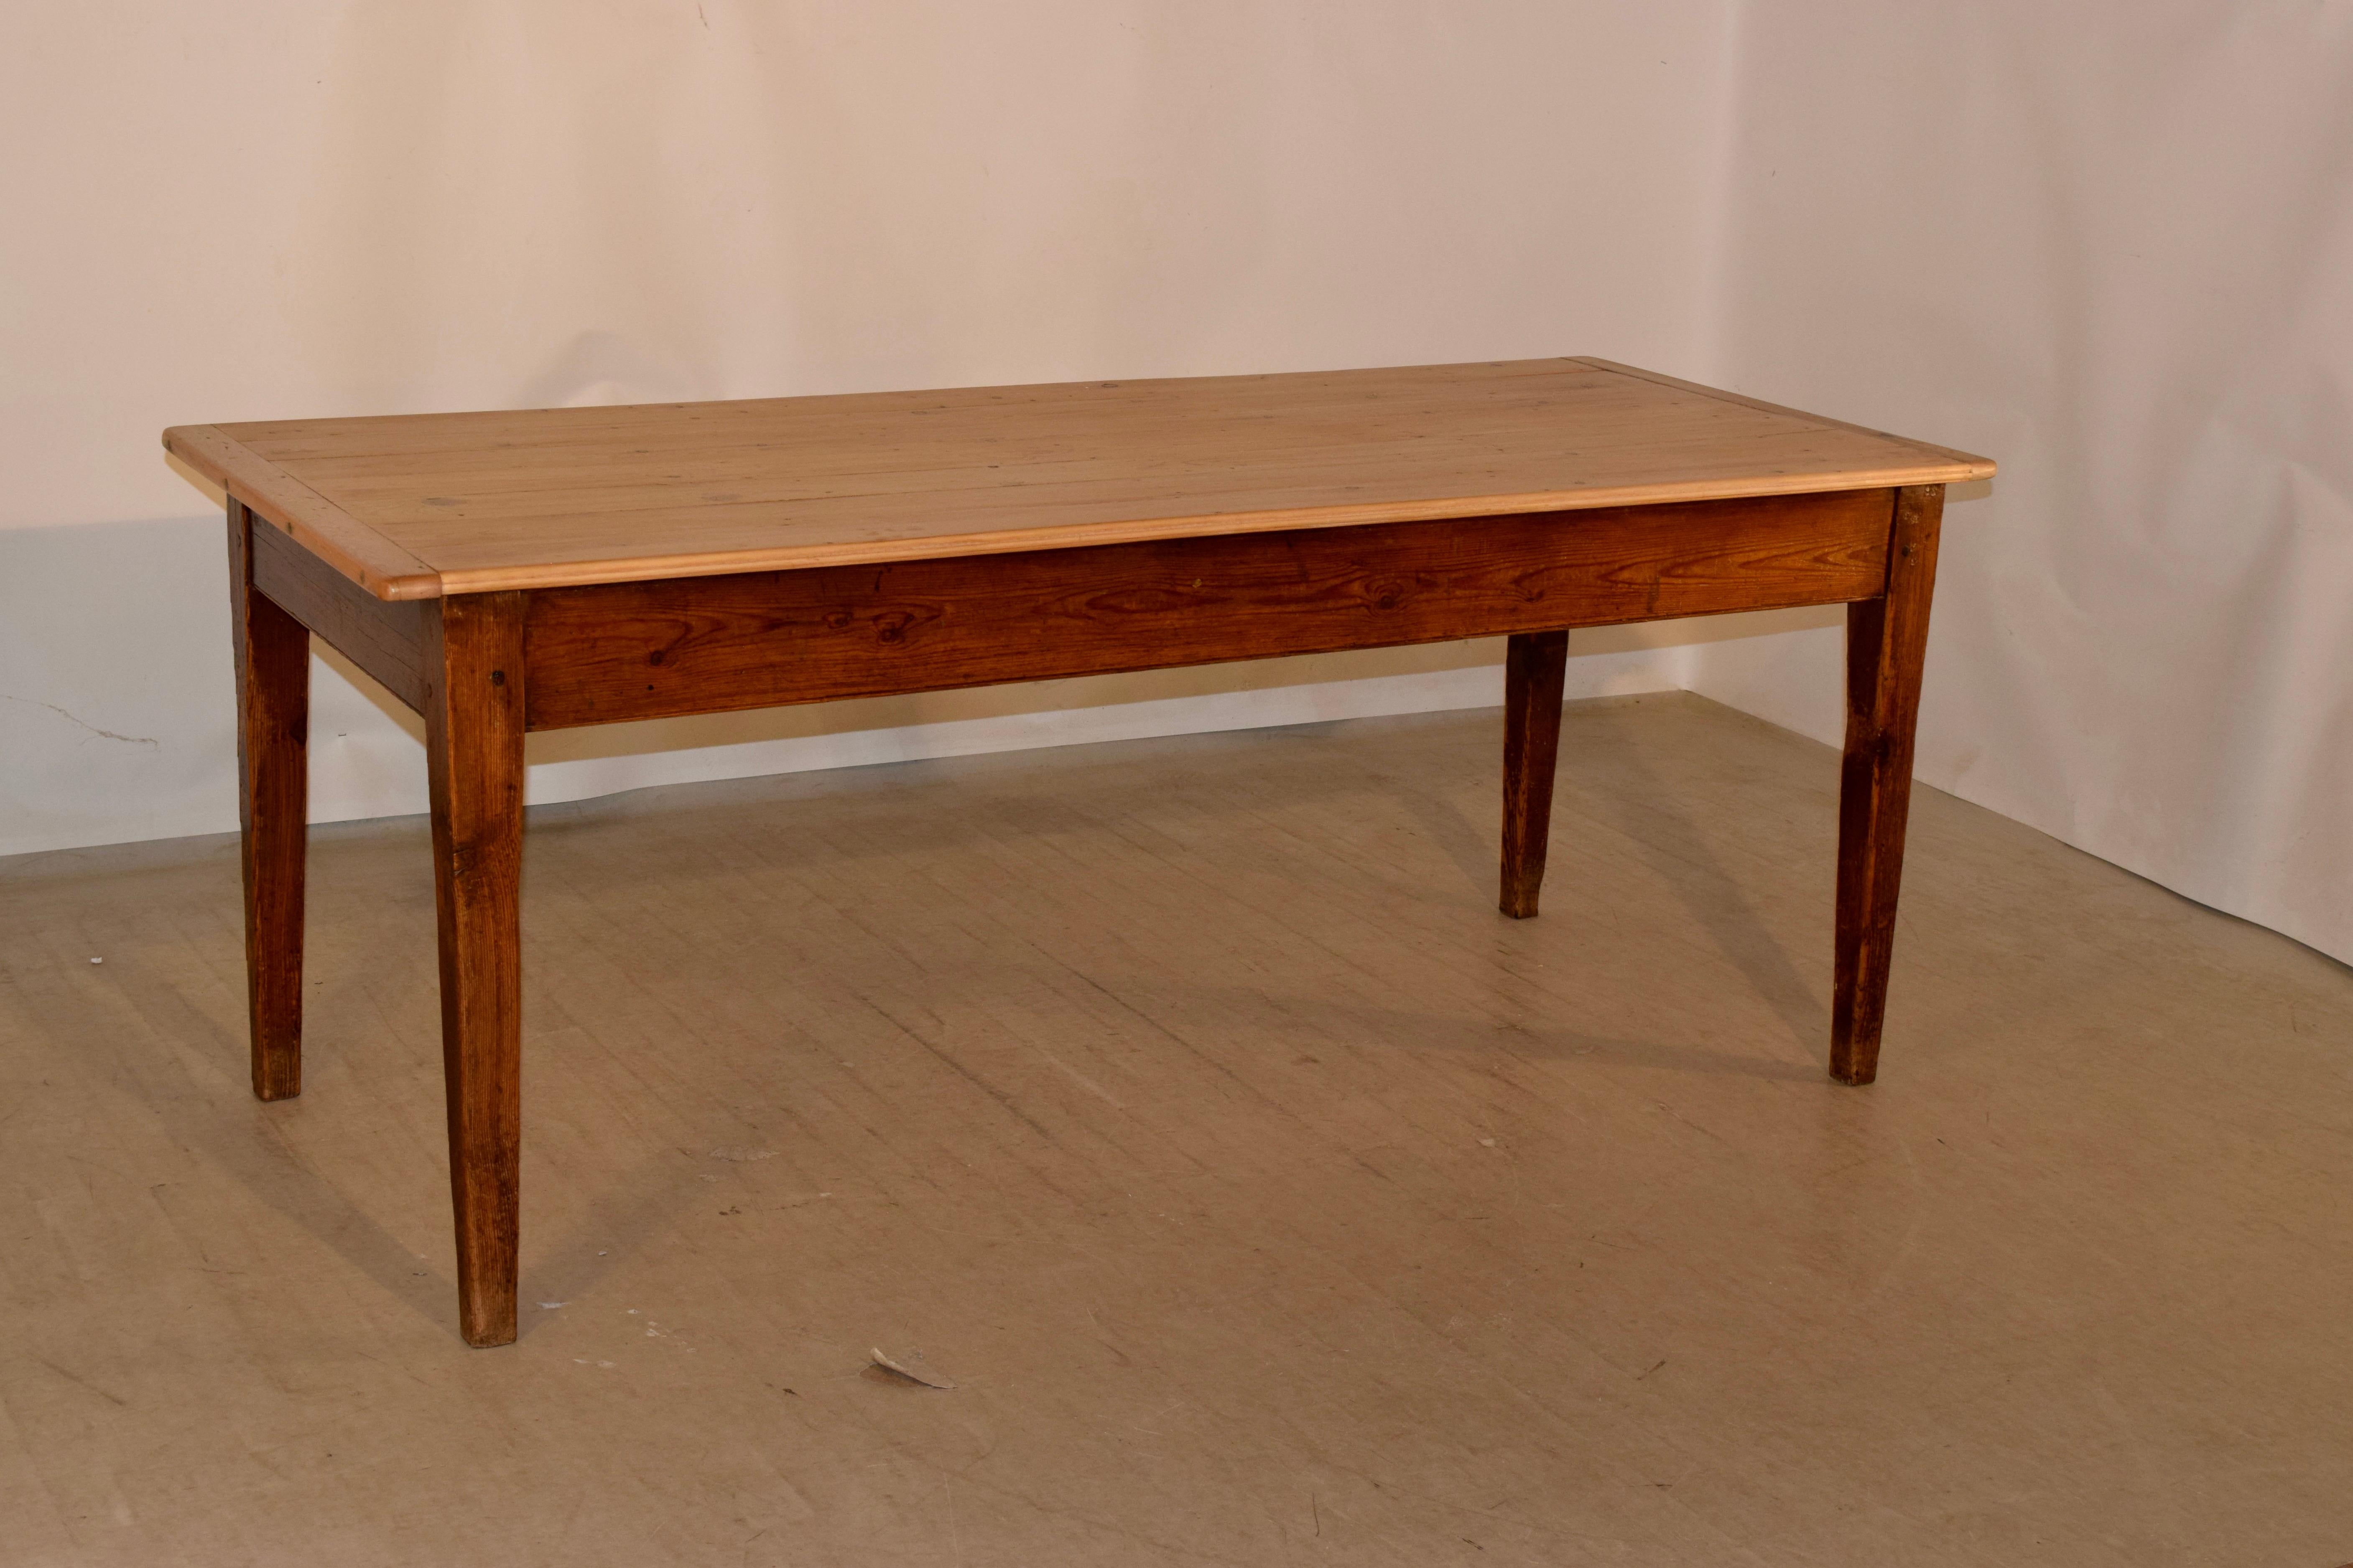 19th century French farm table with a scrubbed plank top which has banded ends, supported on a pitch pine base with tapered legs. Simple and elegant.